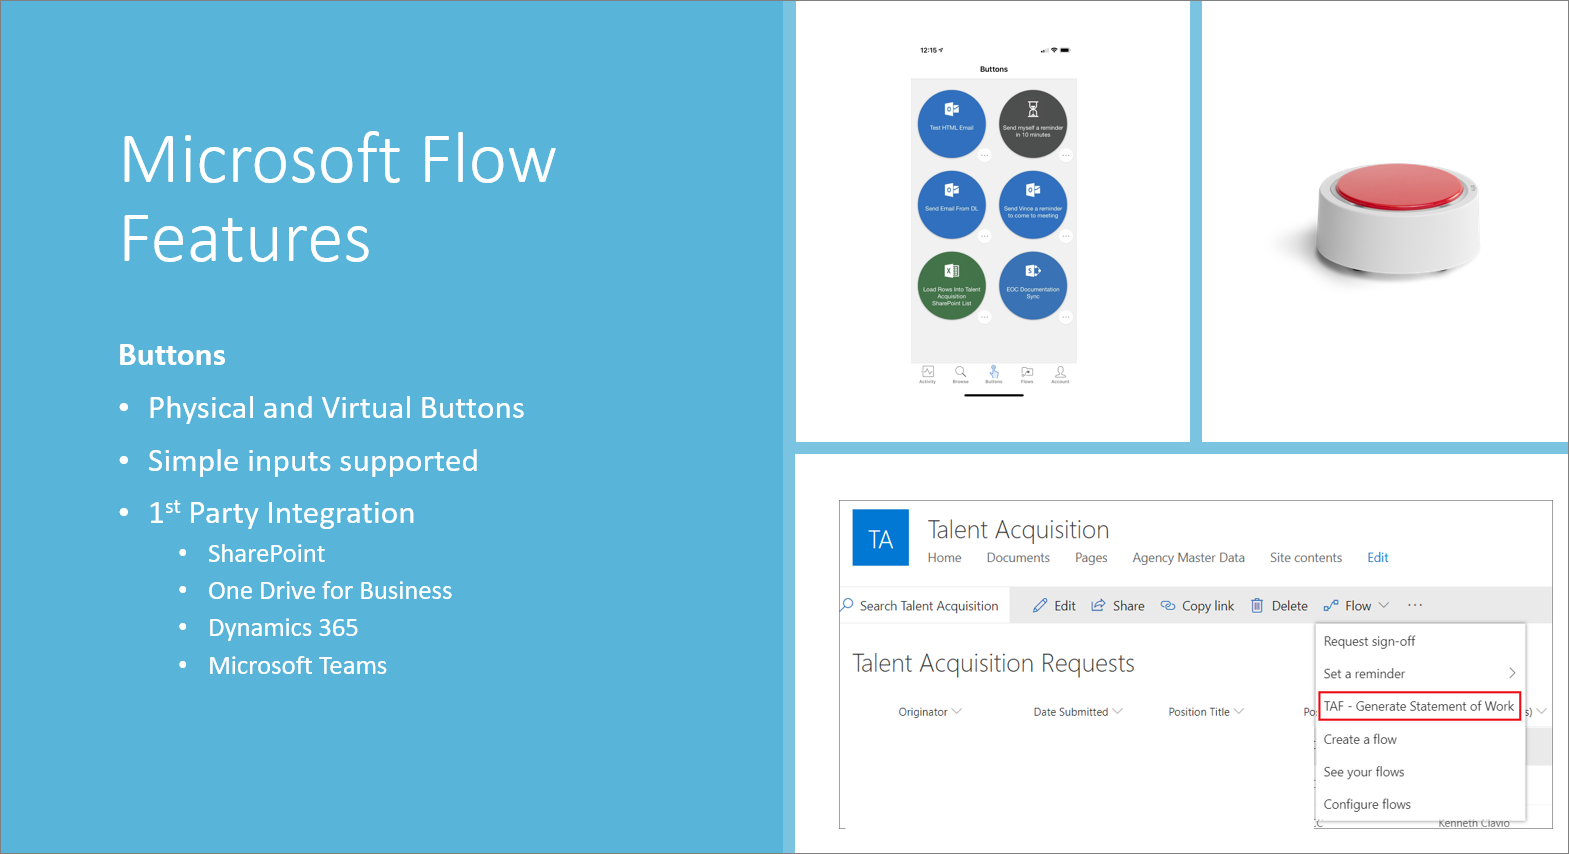 Emerging capability for Microsoft Flow